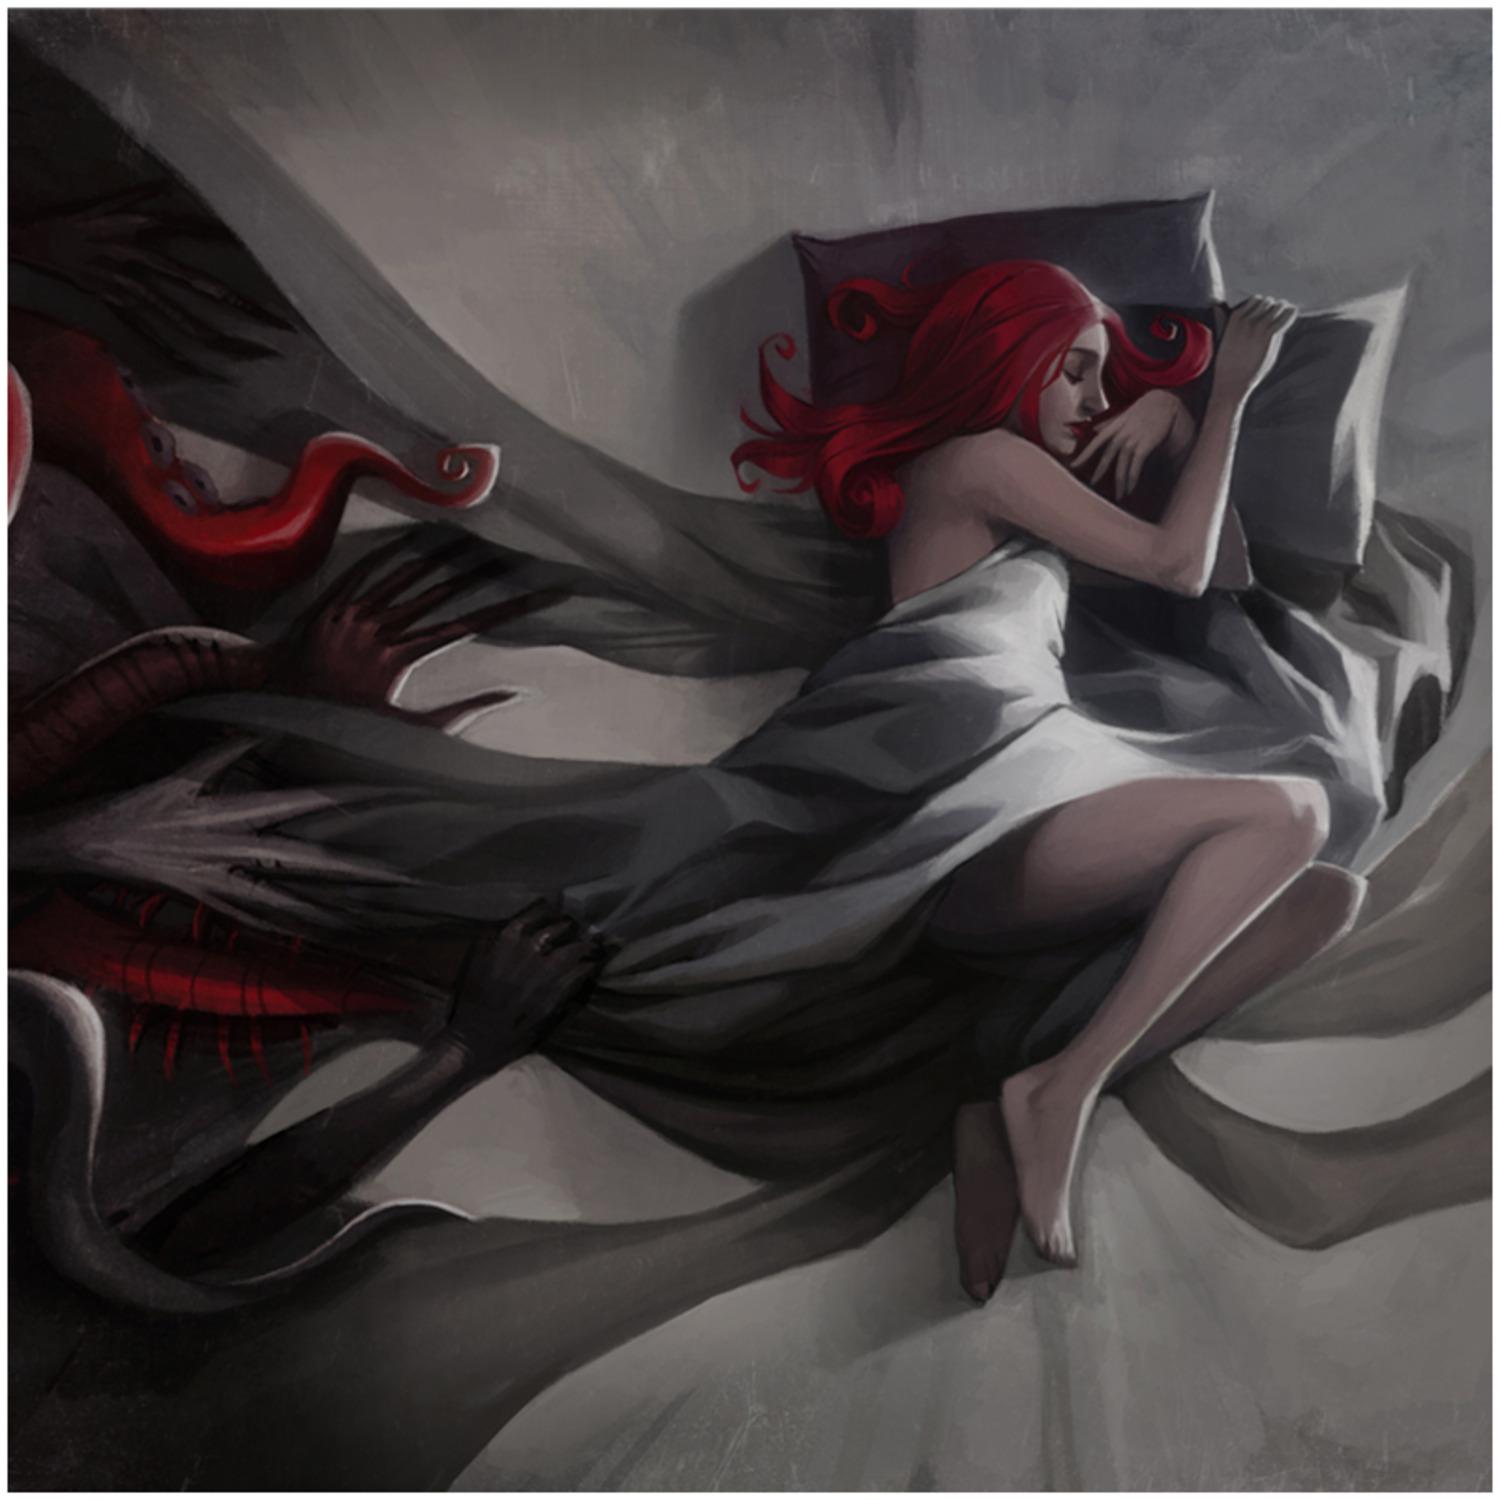 Cunninlynguists - So As Not To Wake You (Interlude)